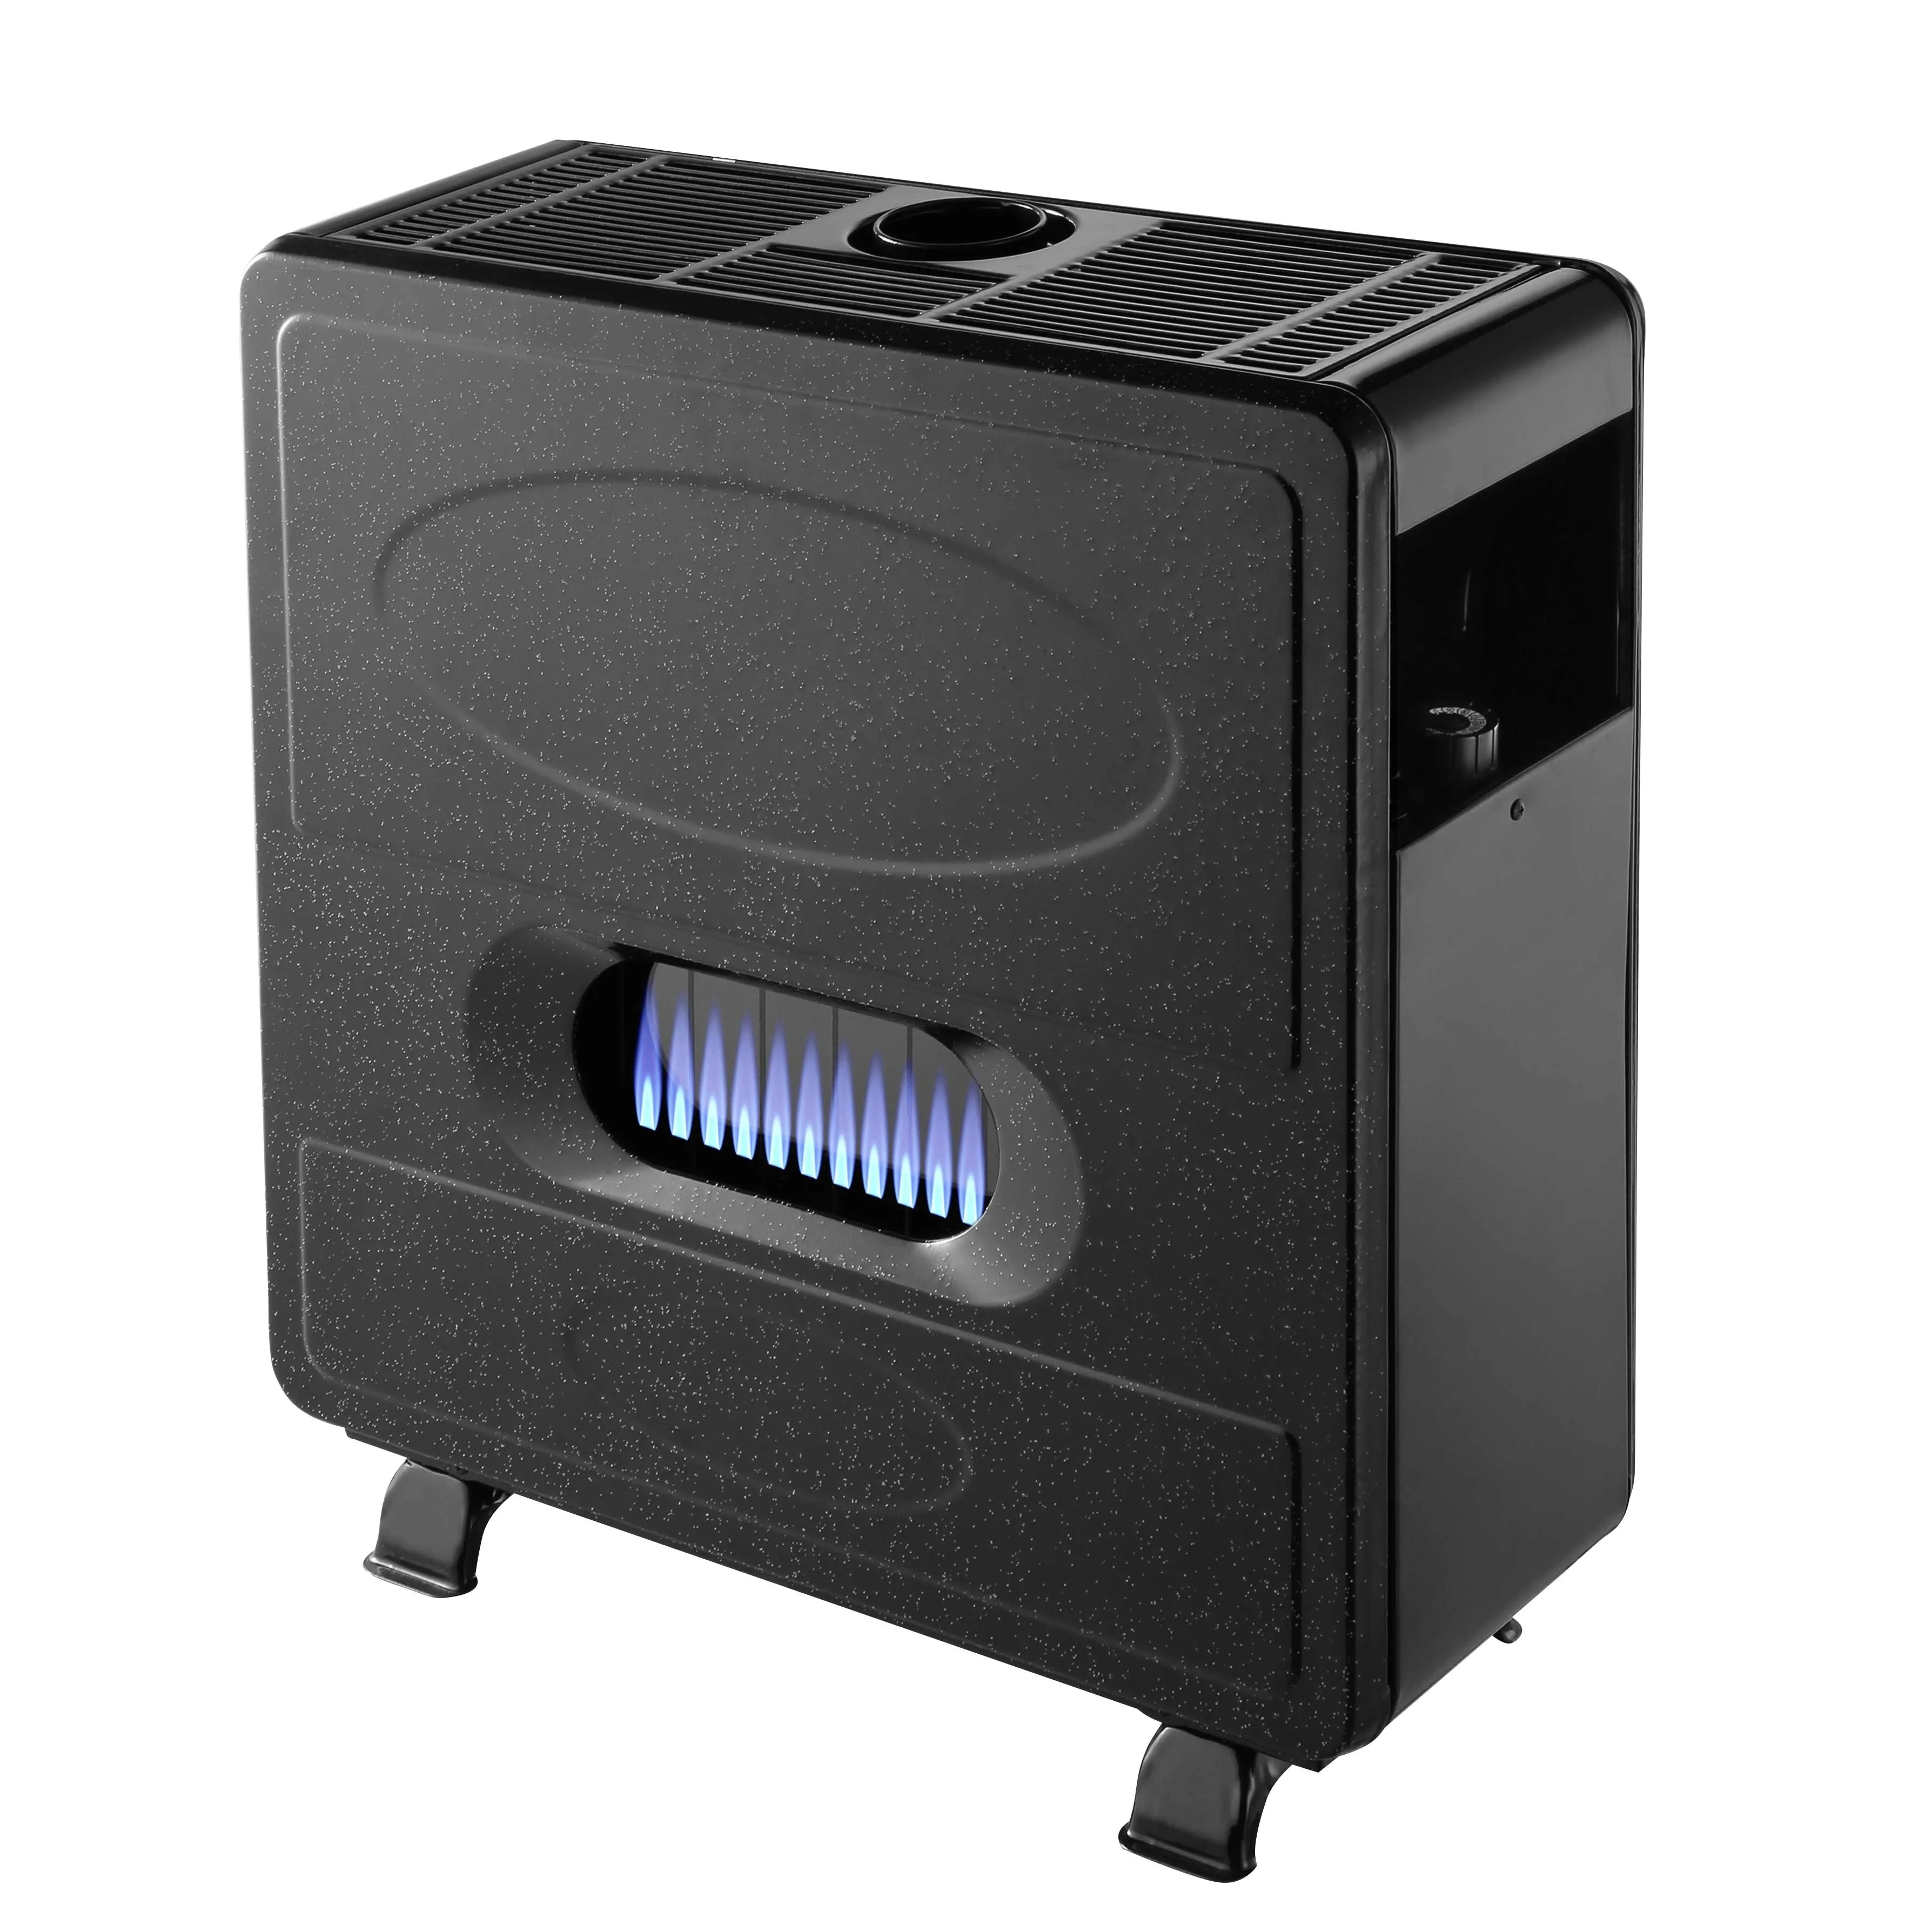 Hot sale Vent LPG Natural gas convector space heater